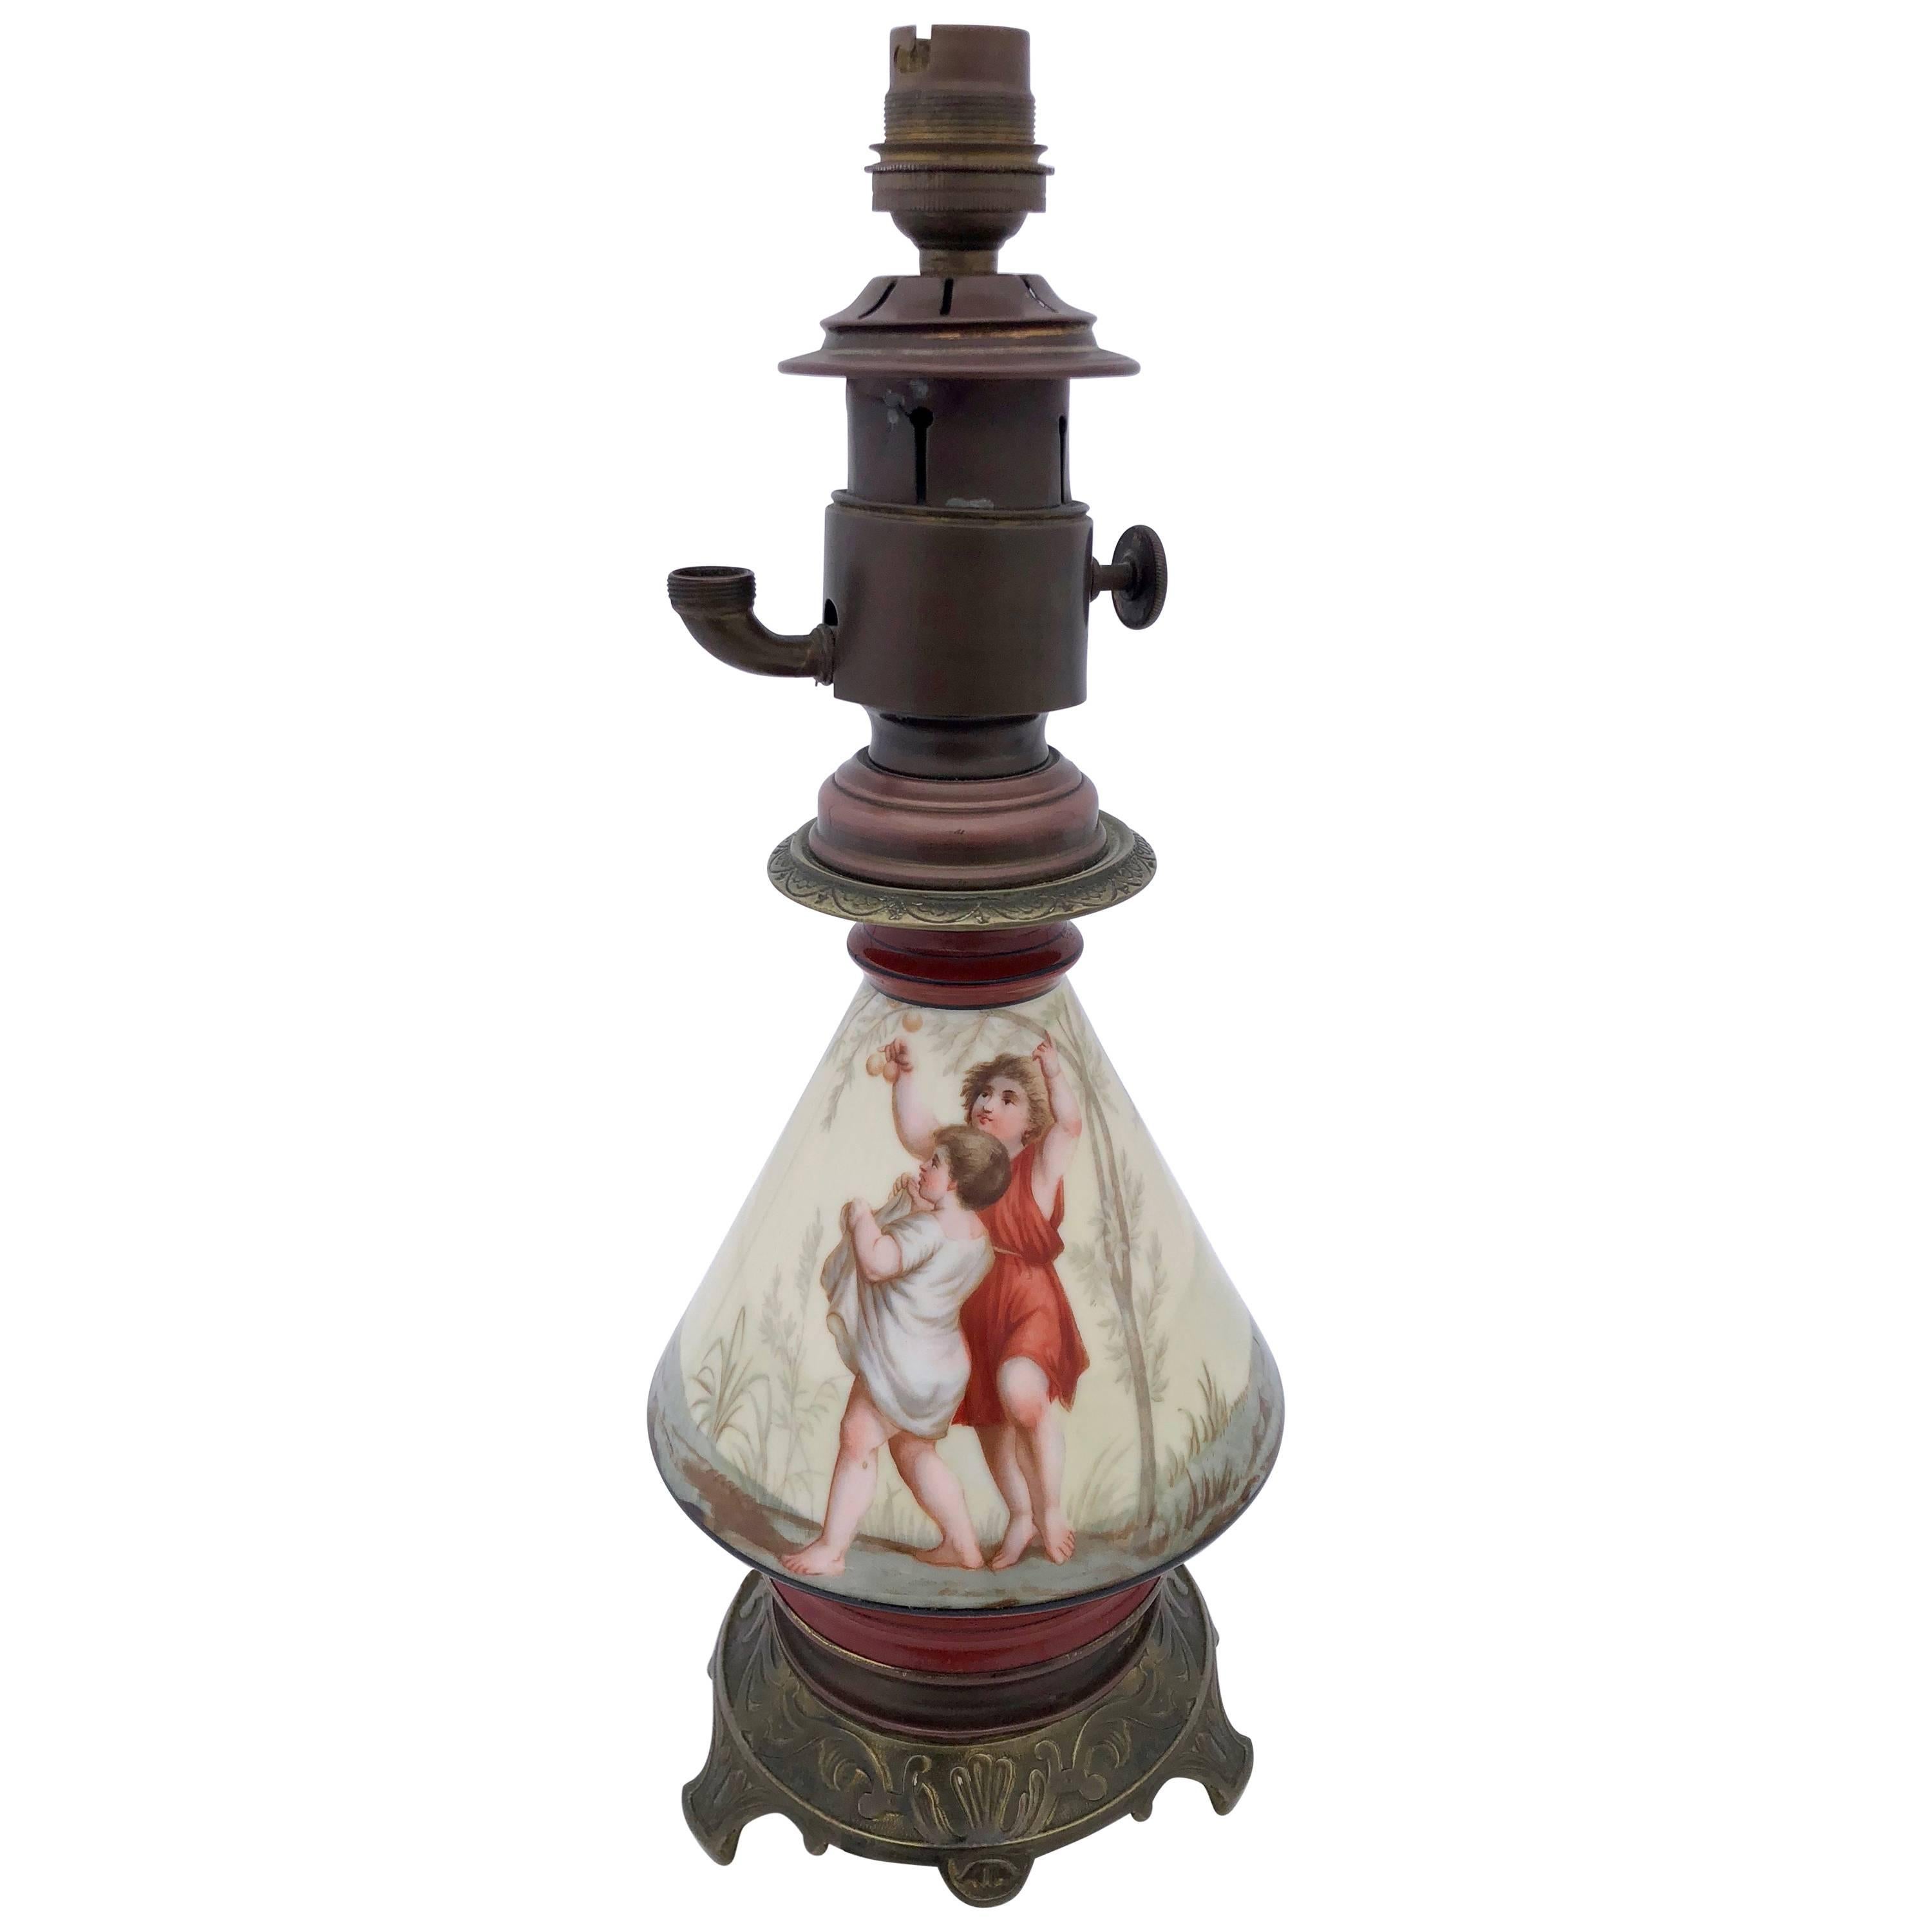 French Antique Porcelain Lamp with Two Hand-Painted Children Scenes, Early 1900s For Sale